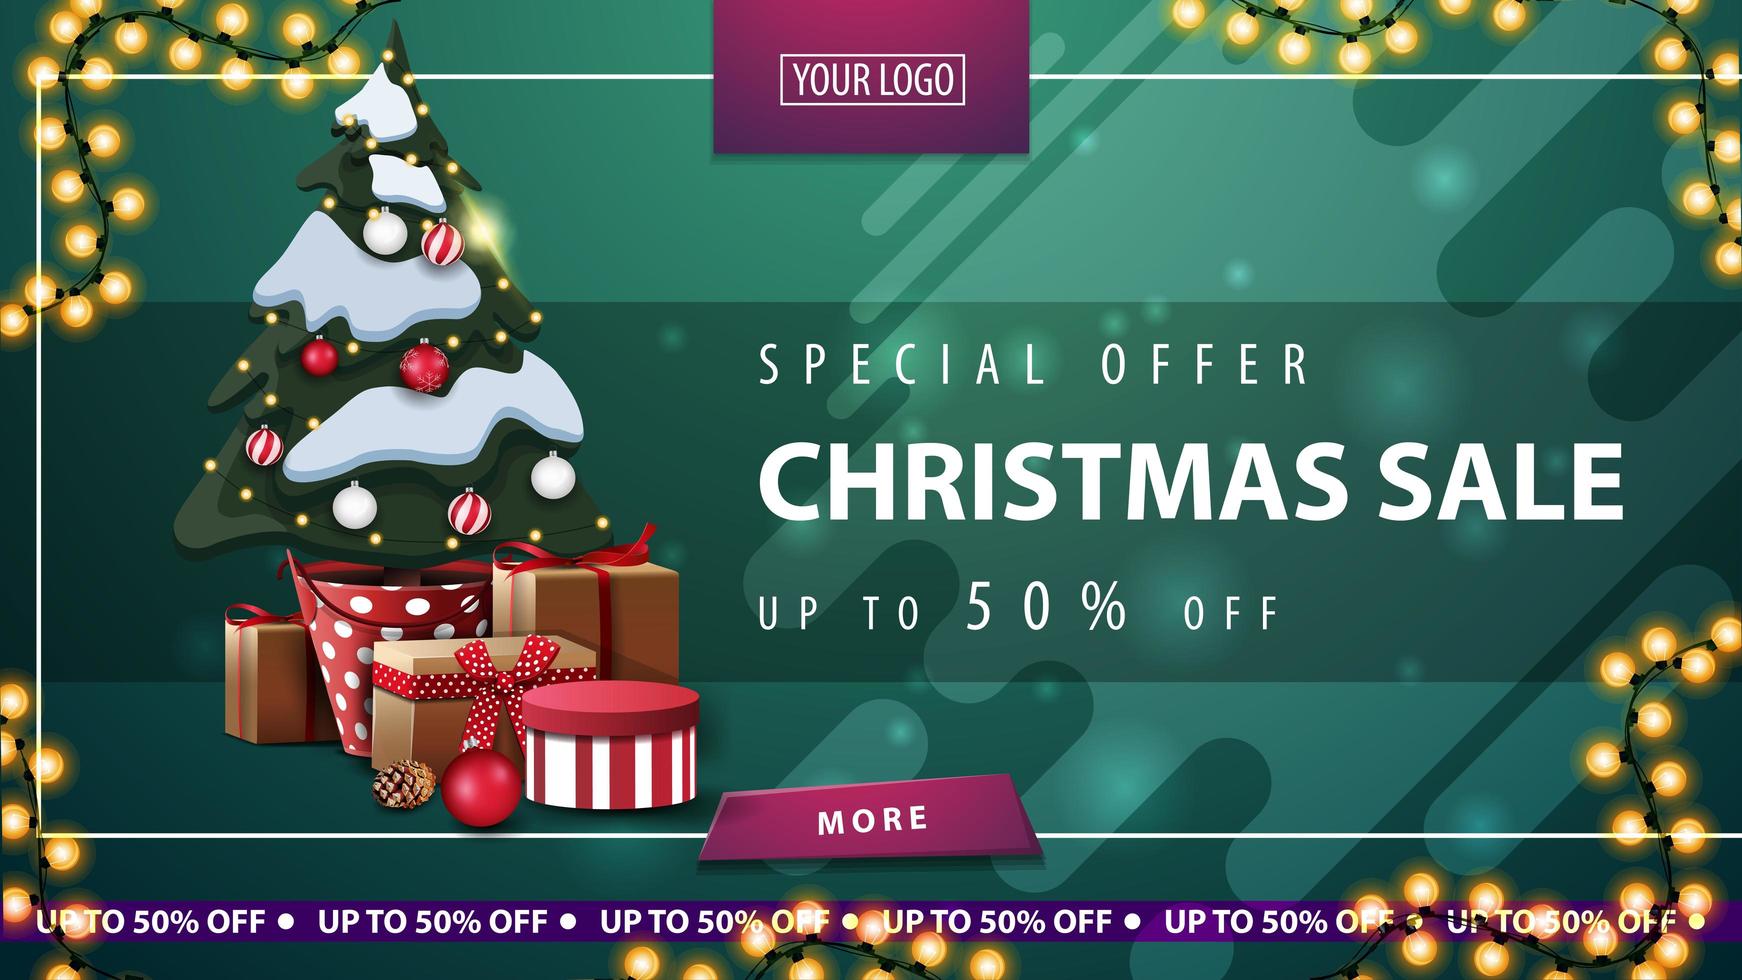 Special offer, Christmas sale, up to 50 off, green horizontal discount banner with button, frame garland and Christmas tree in a pot with gifts vector